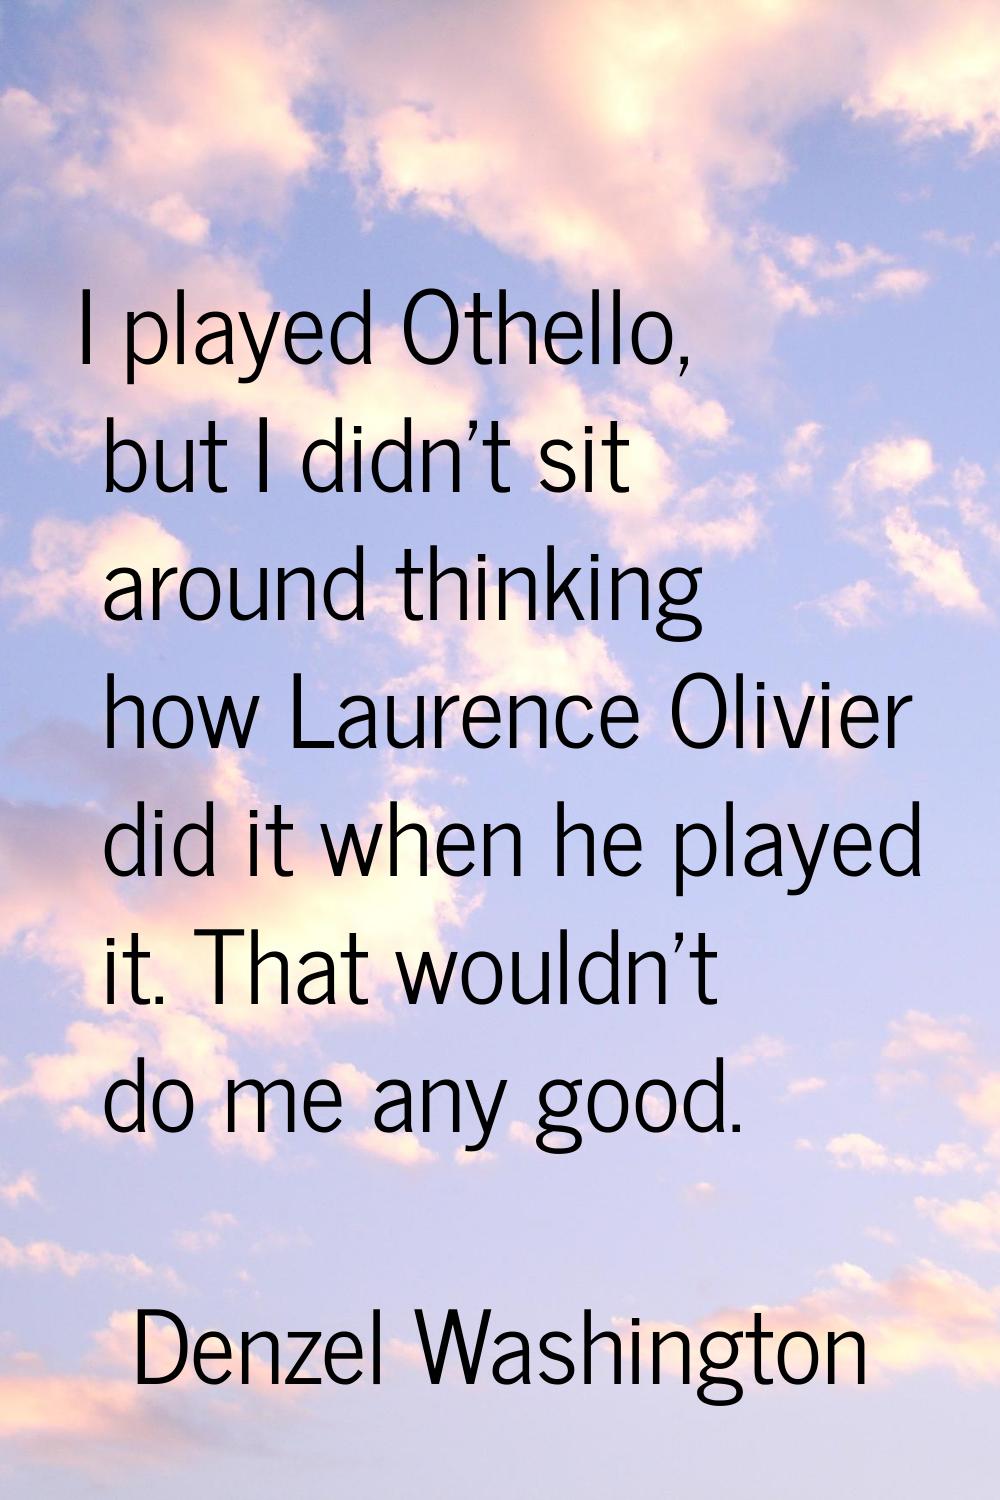 I played Othello, but I didn't sit around thinking how Laurence Olivier did it when he played it. T